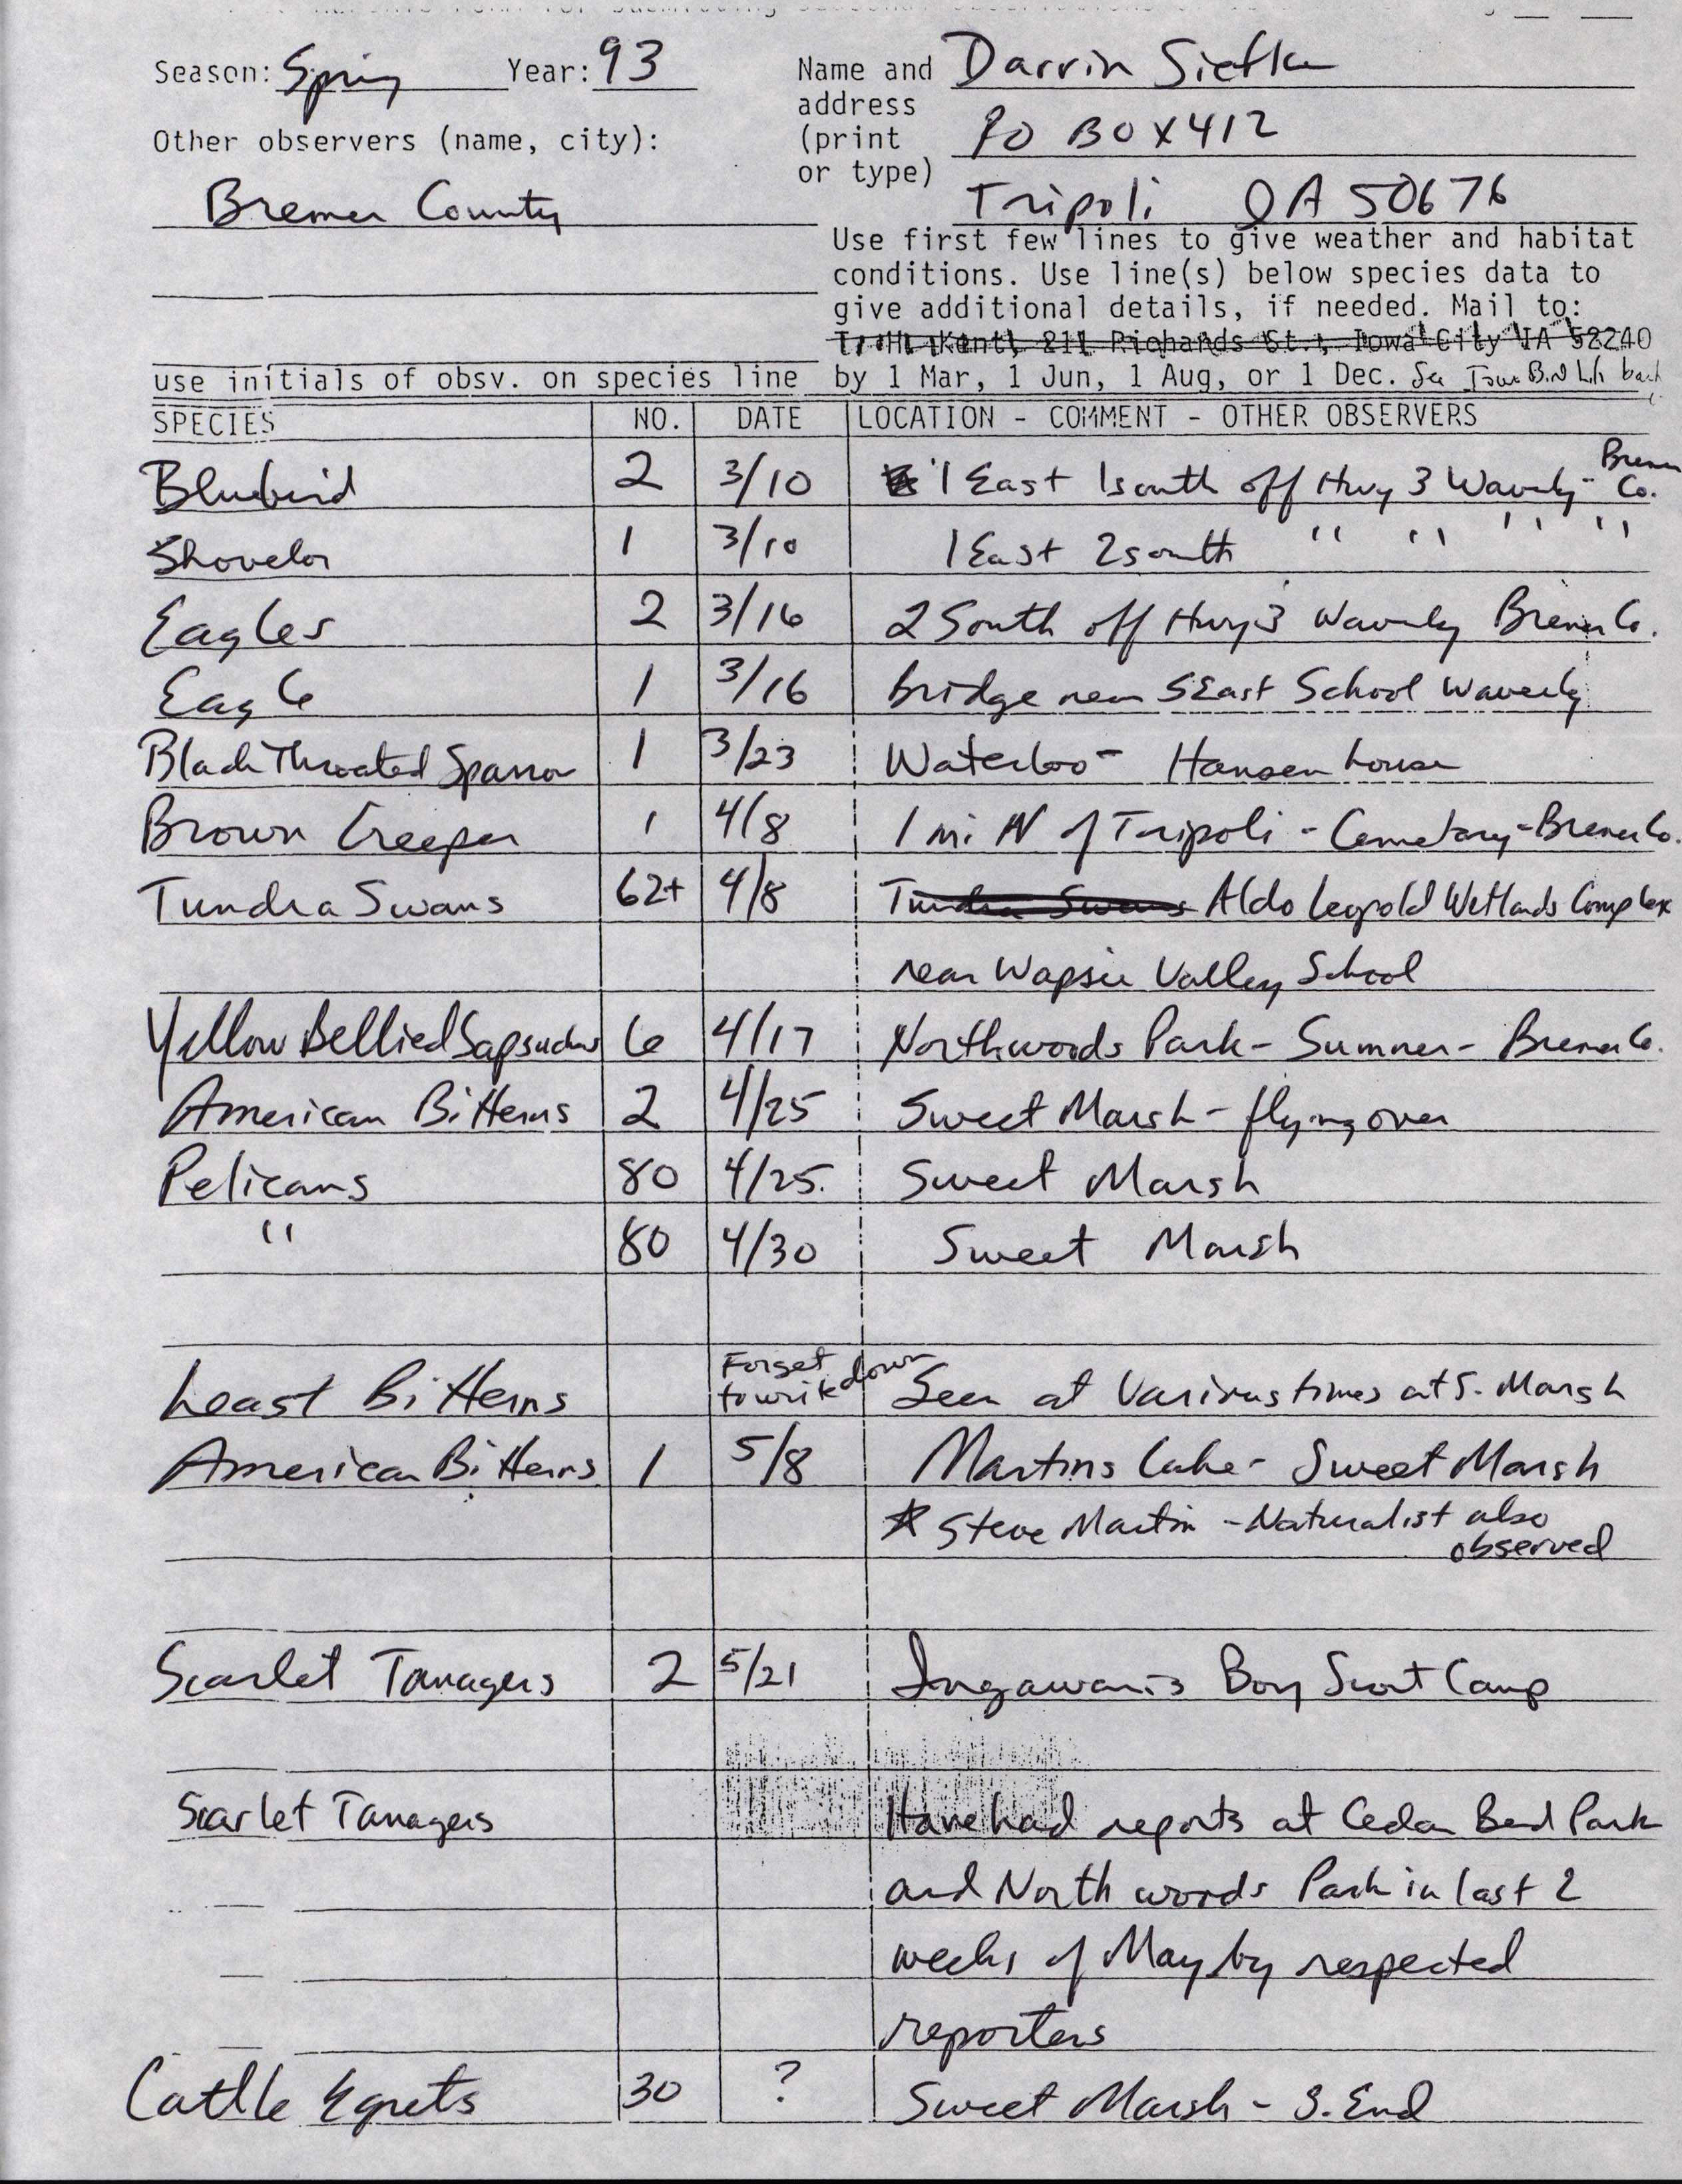 Field reports form for submitting seasonal observations of Iowa birds, Darrin Siefken, Spring 1993